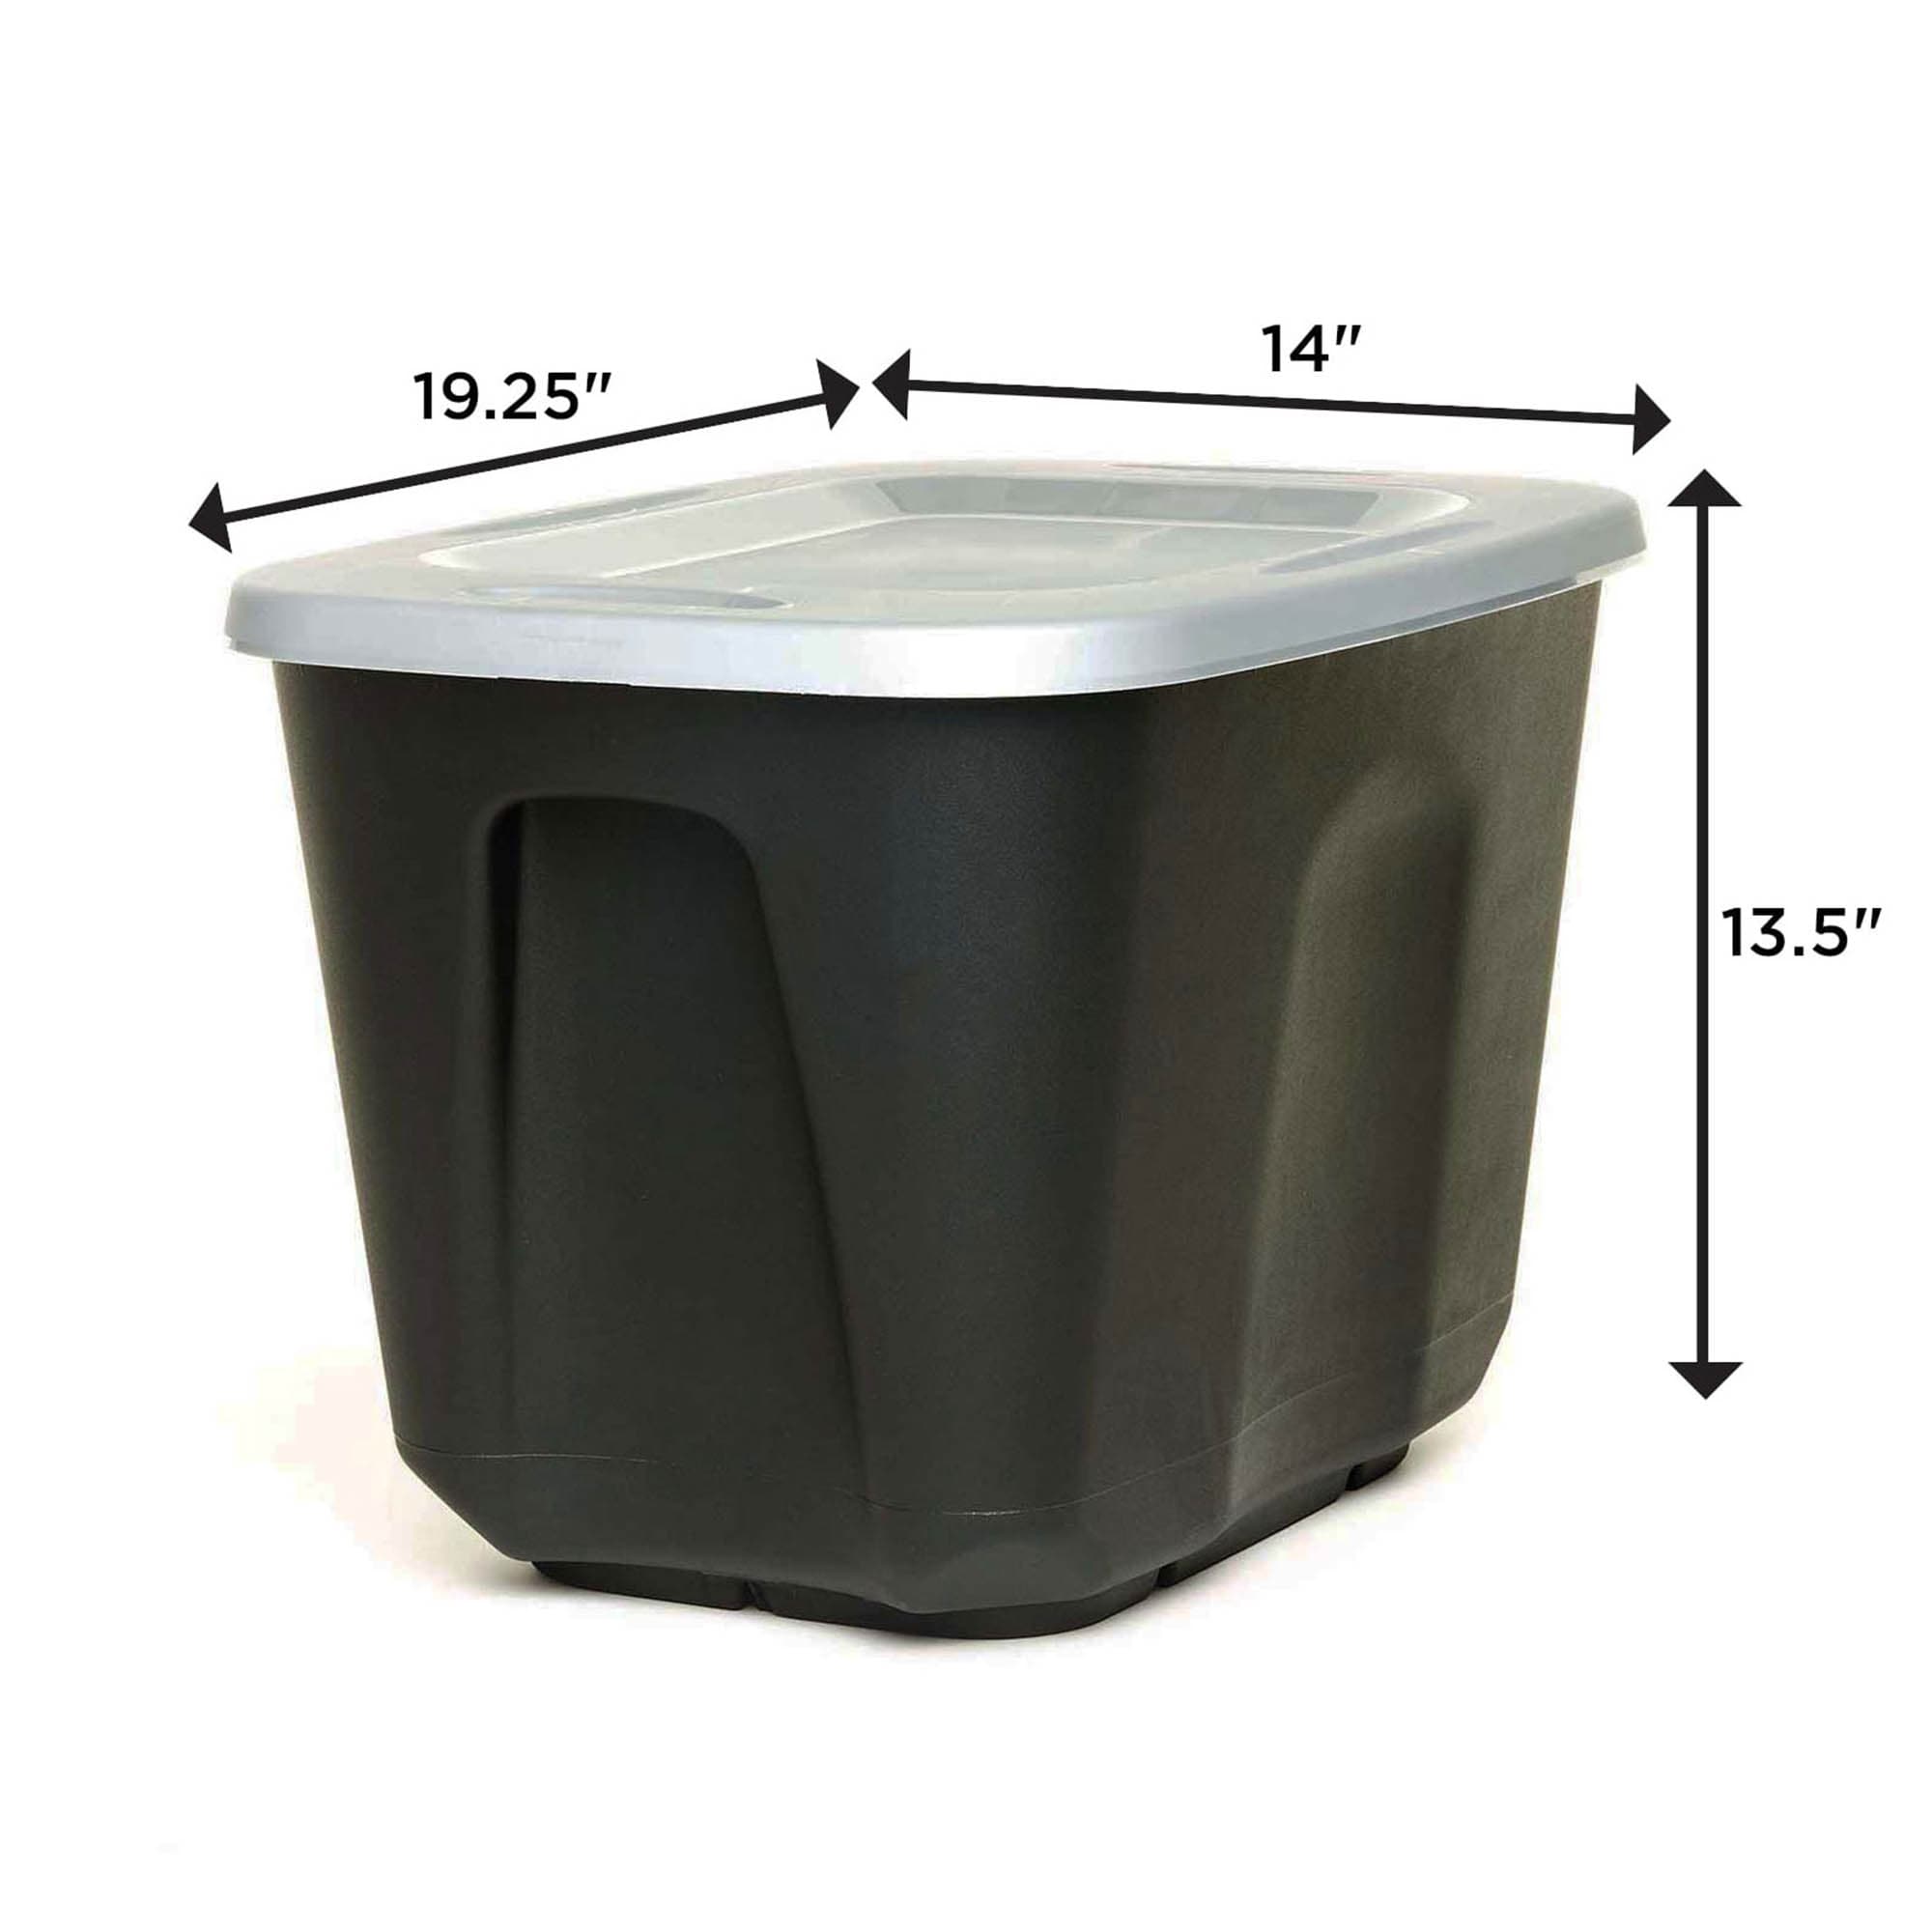 Homz Products Large 10-Gallons (40-Quart) Tote Standard with at Black Lid Snap